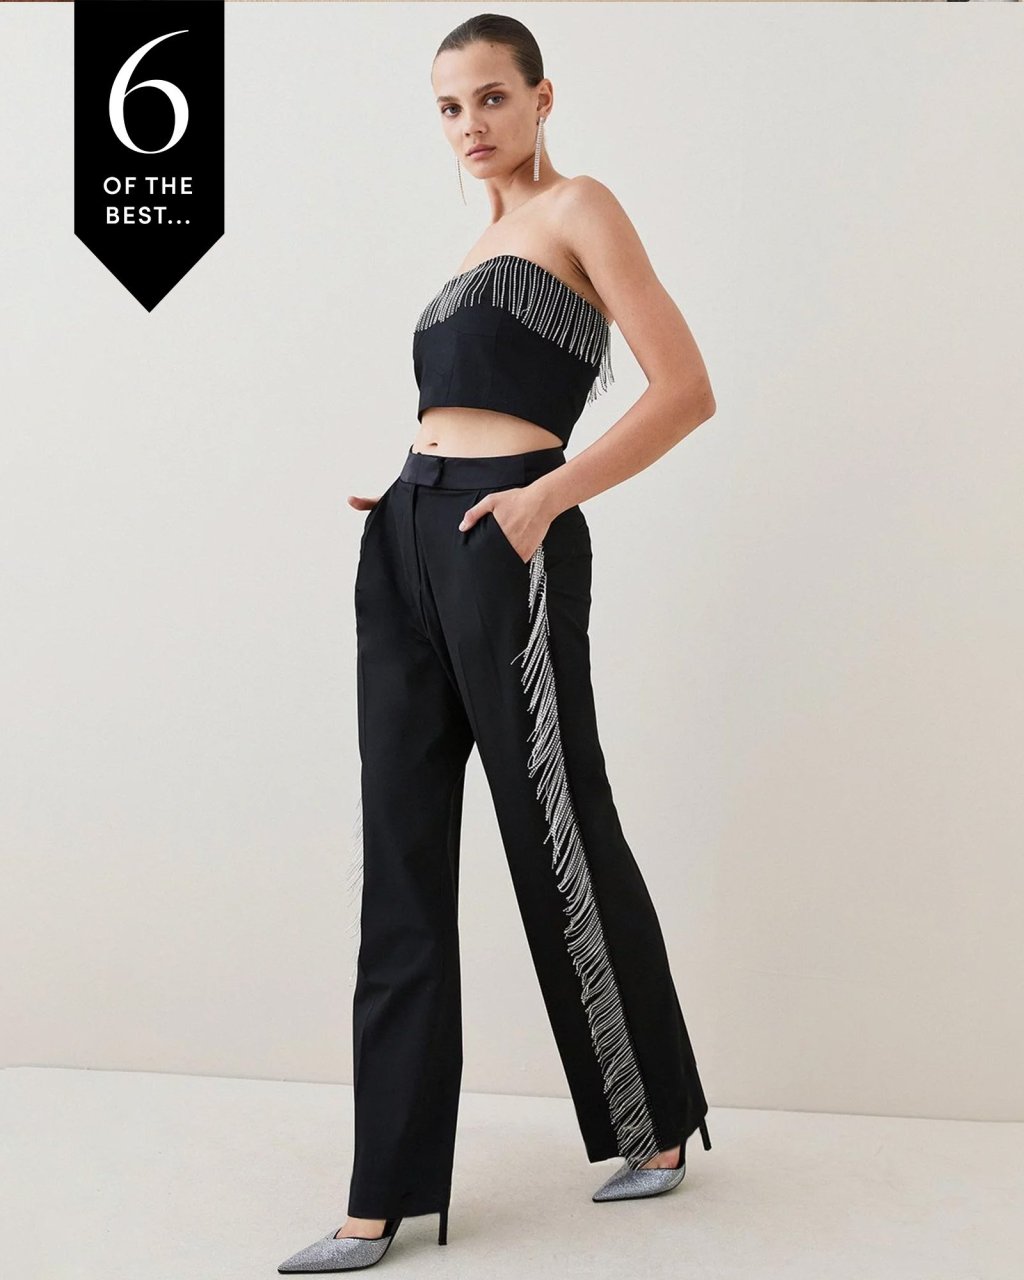 The Statement Trousers On The High Street To Snap Up For Party Season